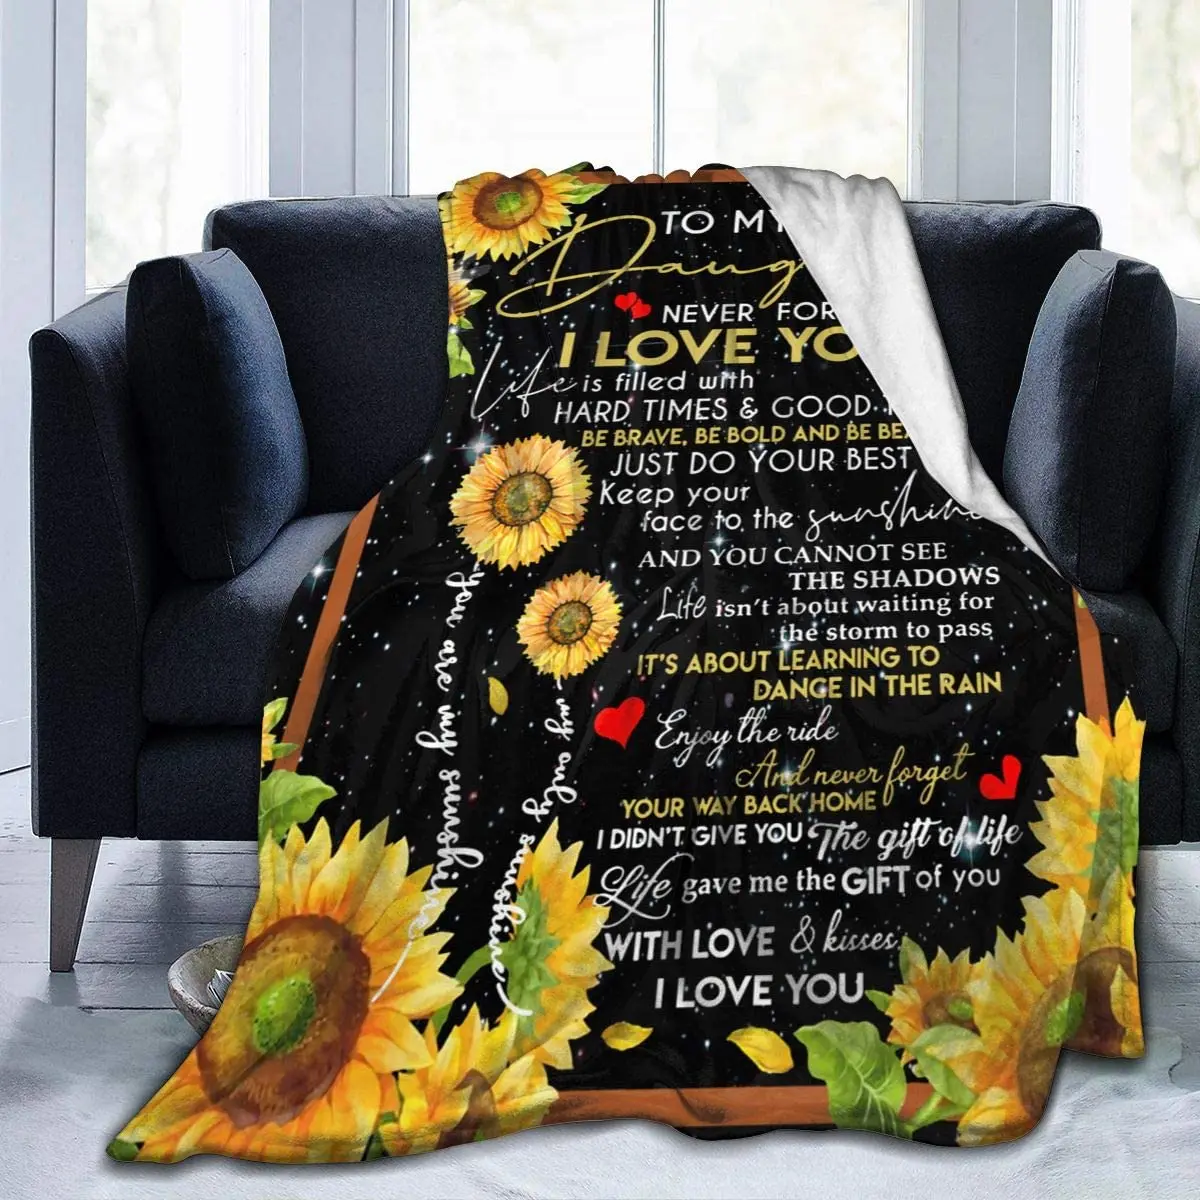 https://ae01.alicdn.com/kf/Se5b8e9887afd4bc59a8a44c1ff6f11a32/Sunflower-Blanket-To-My-Daughter-Never-Forget-That-I-Love-You-From-Mom-Dad-Flannel-Blanket.jpg